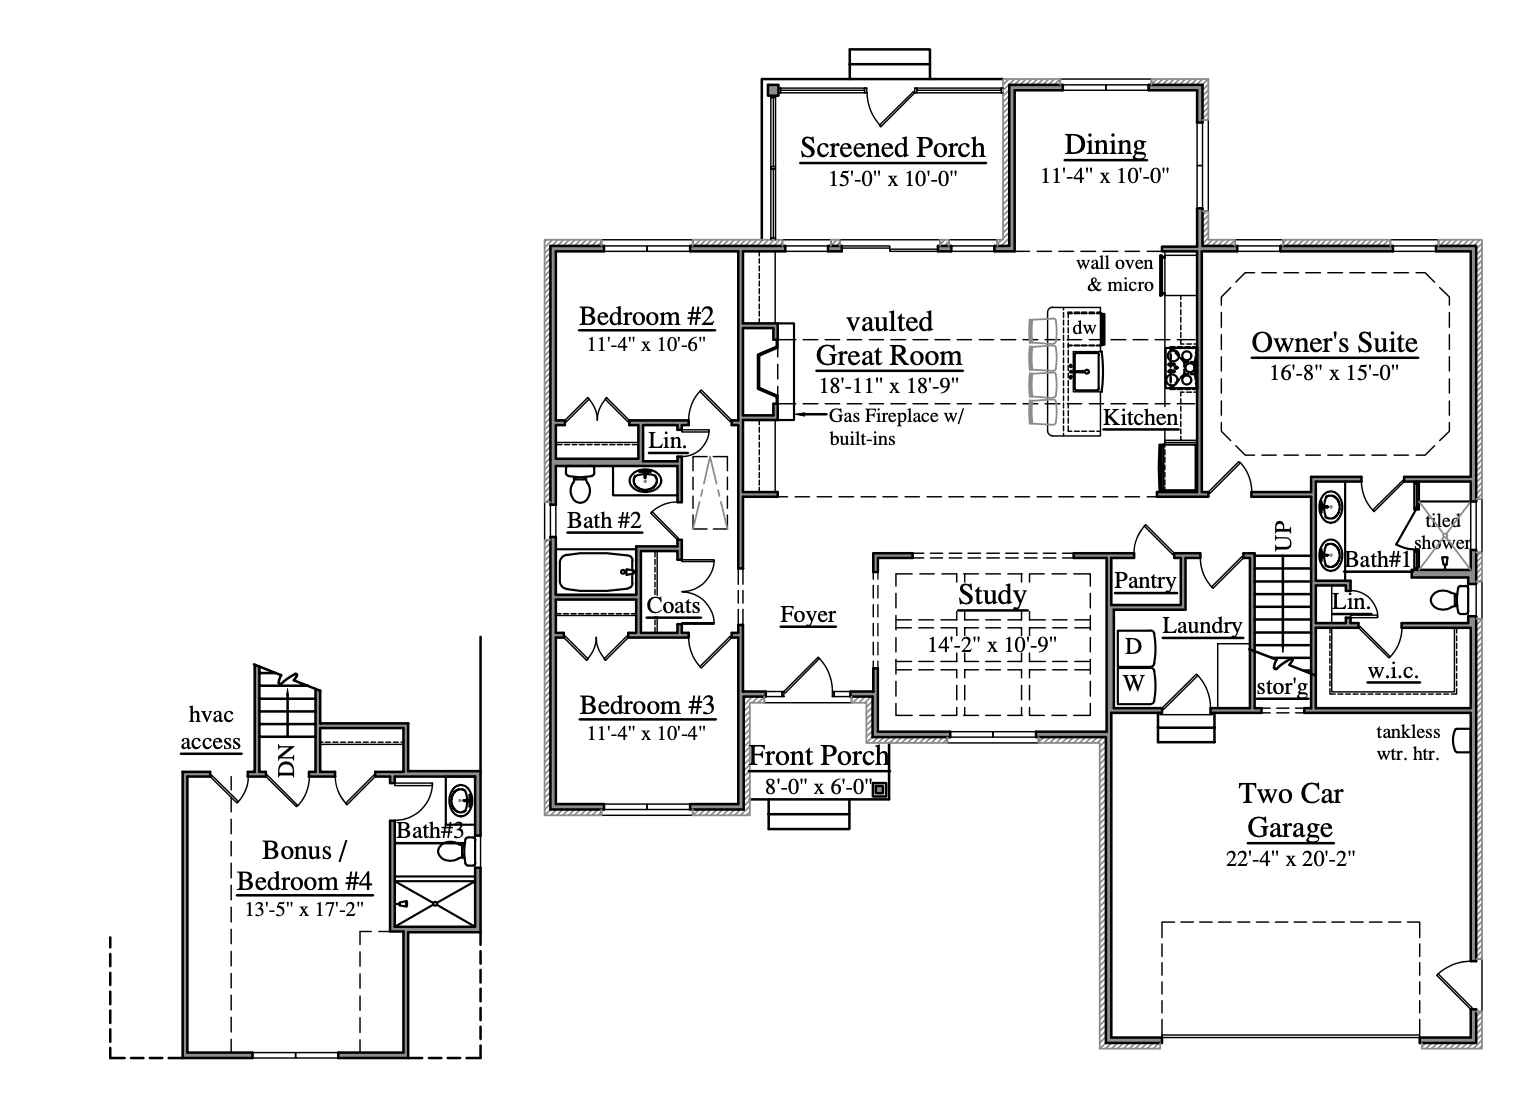 The Taylor floor plan image